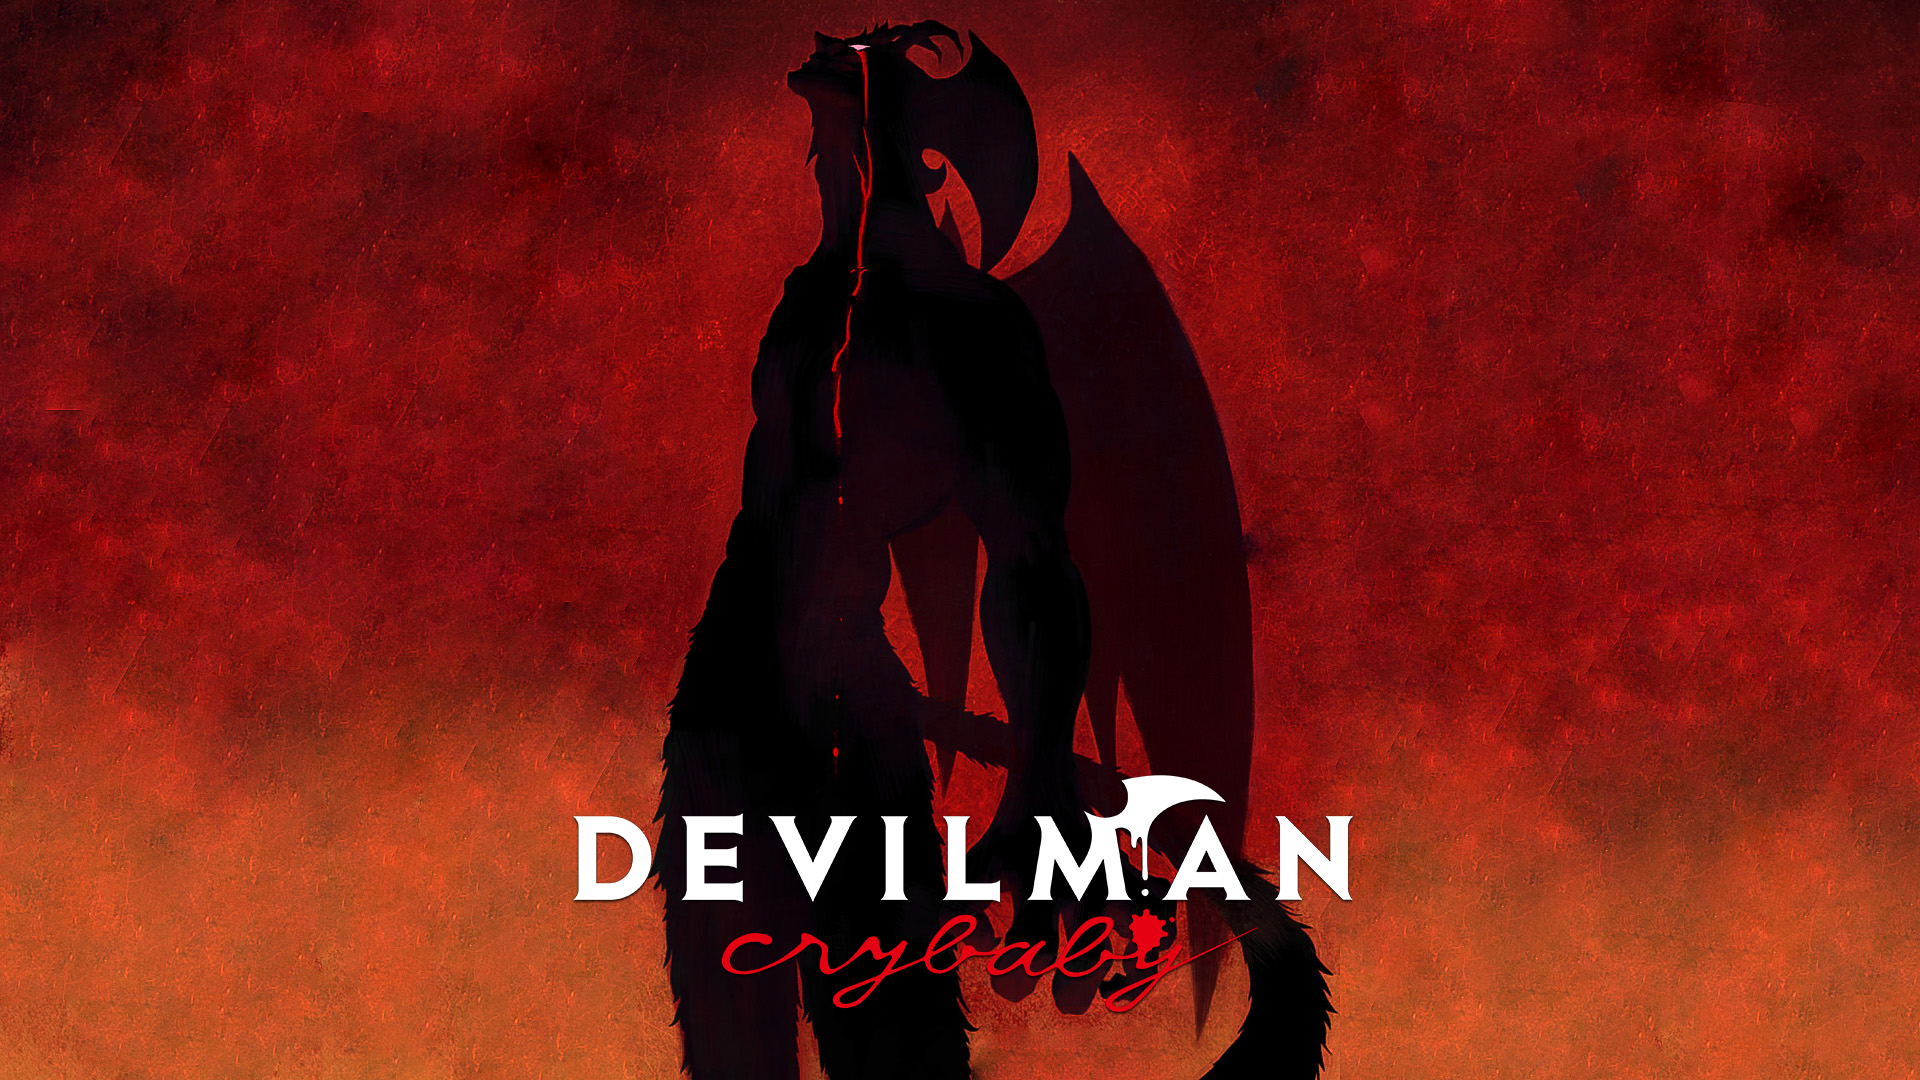 Devilman Crybaby by GinoSenpai